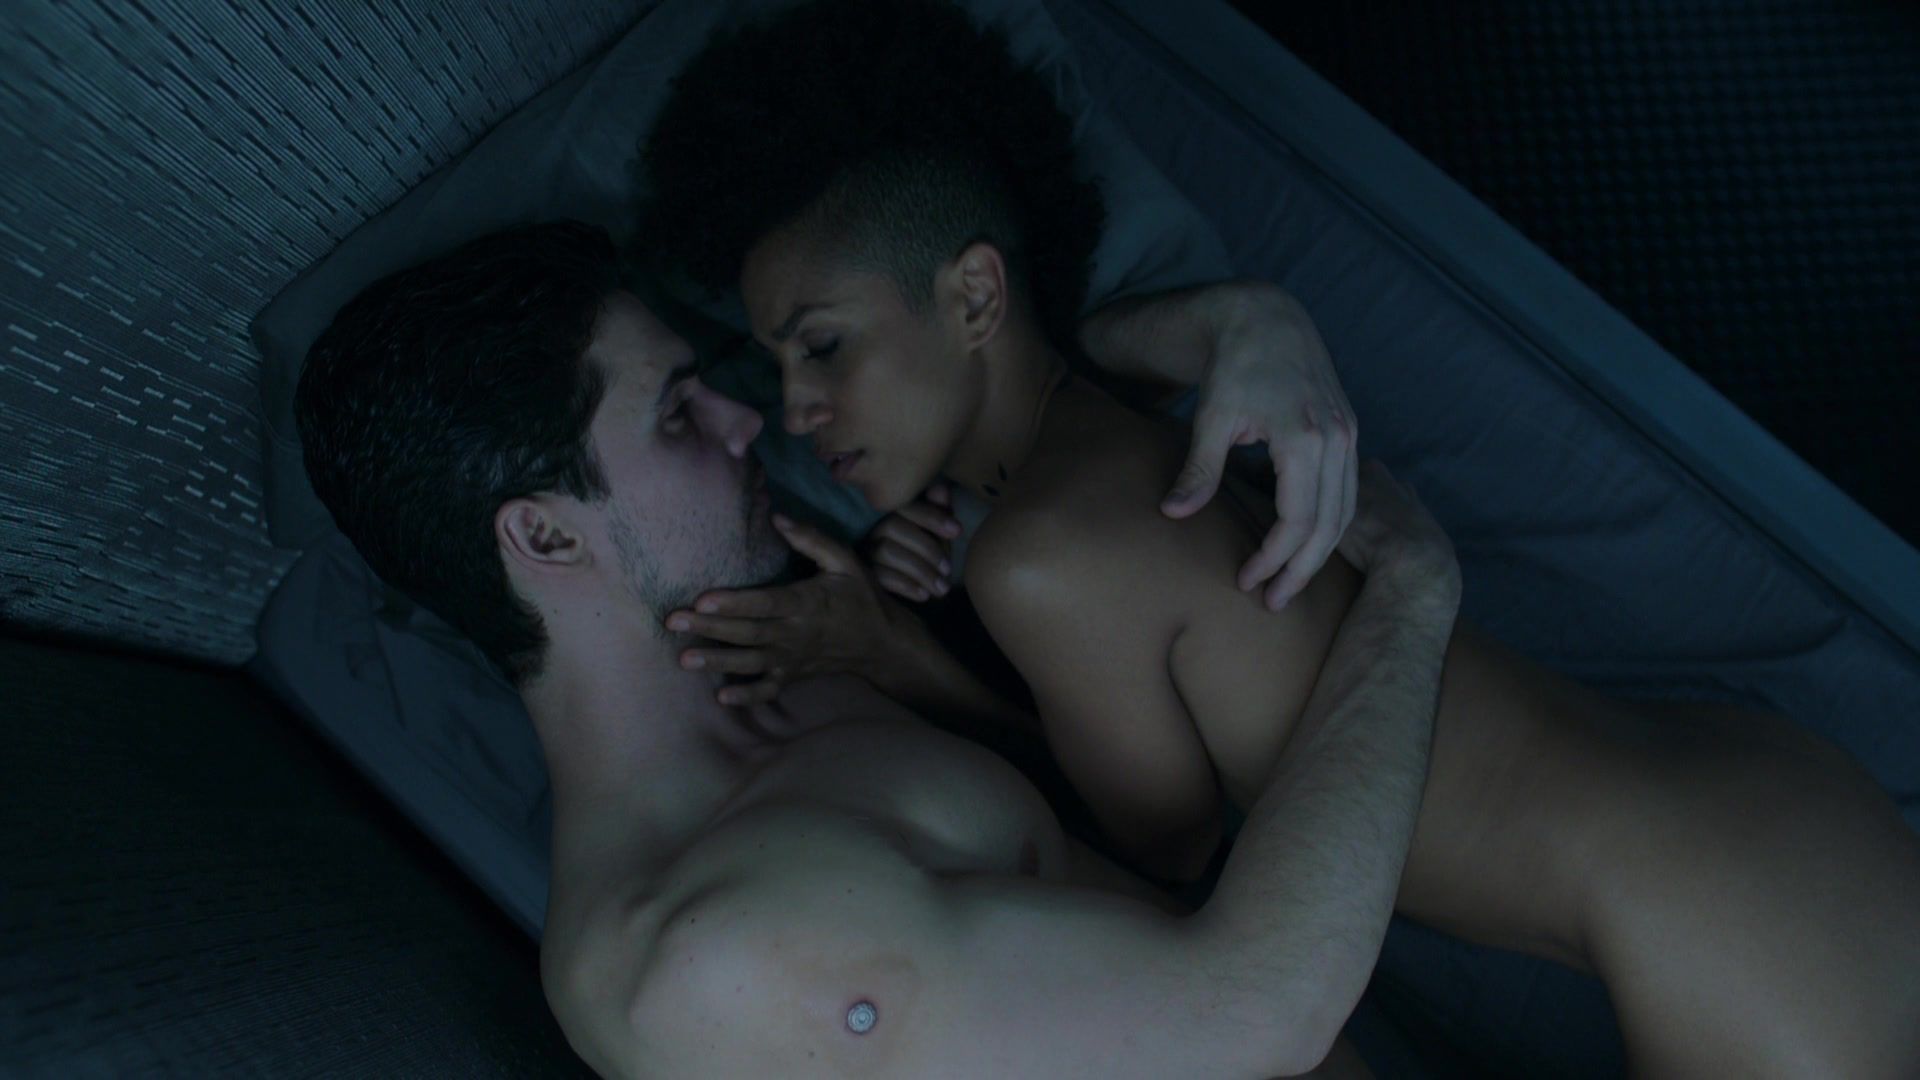 Babe Dominique Tipper nude - The Expanse s03e06 (2018) Real Amateur